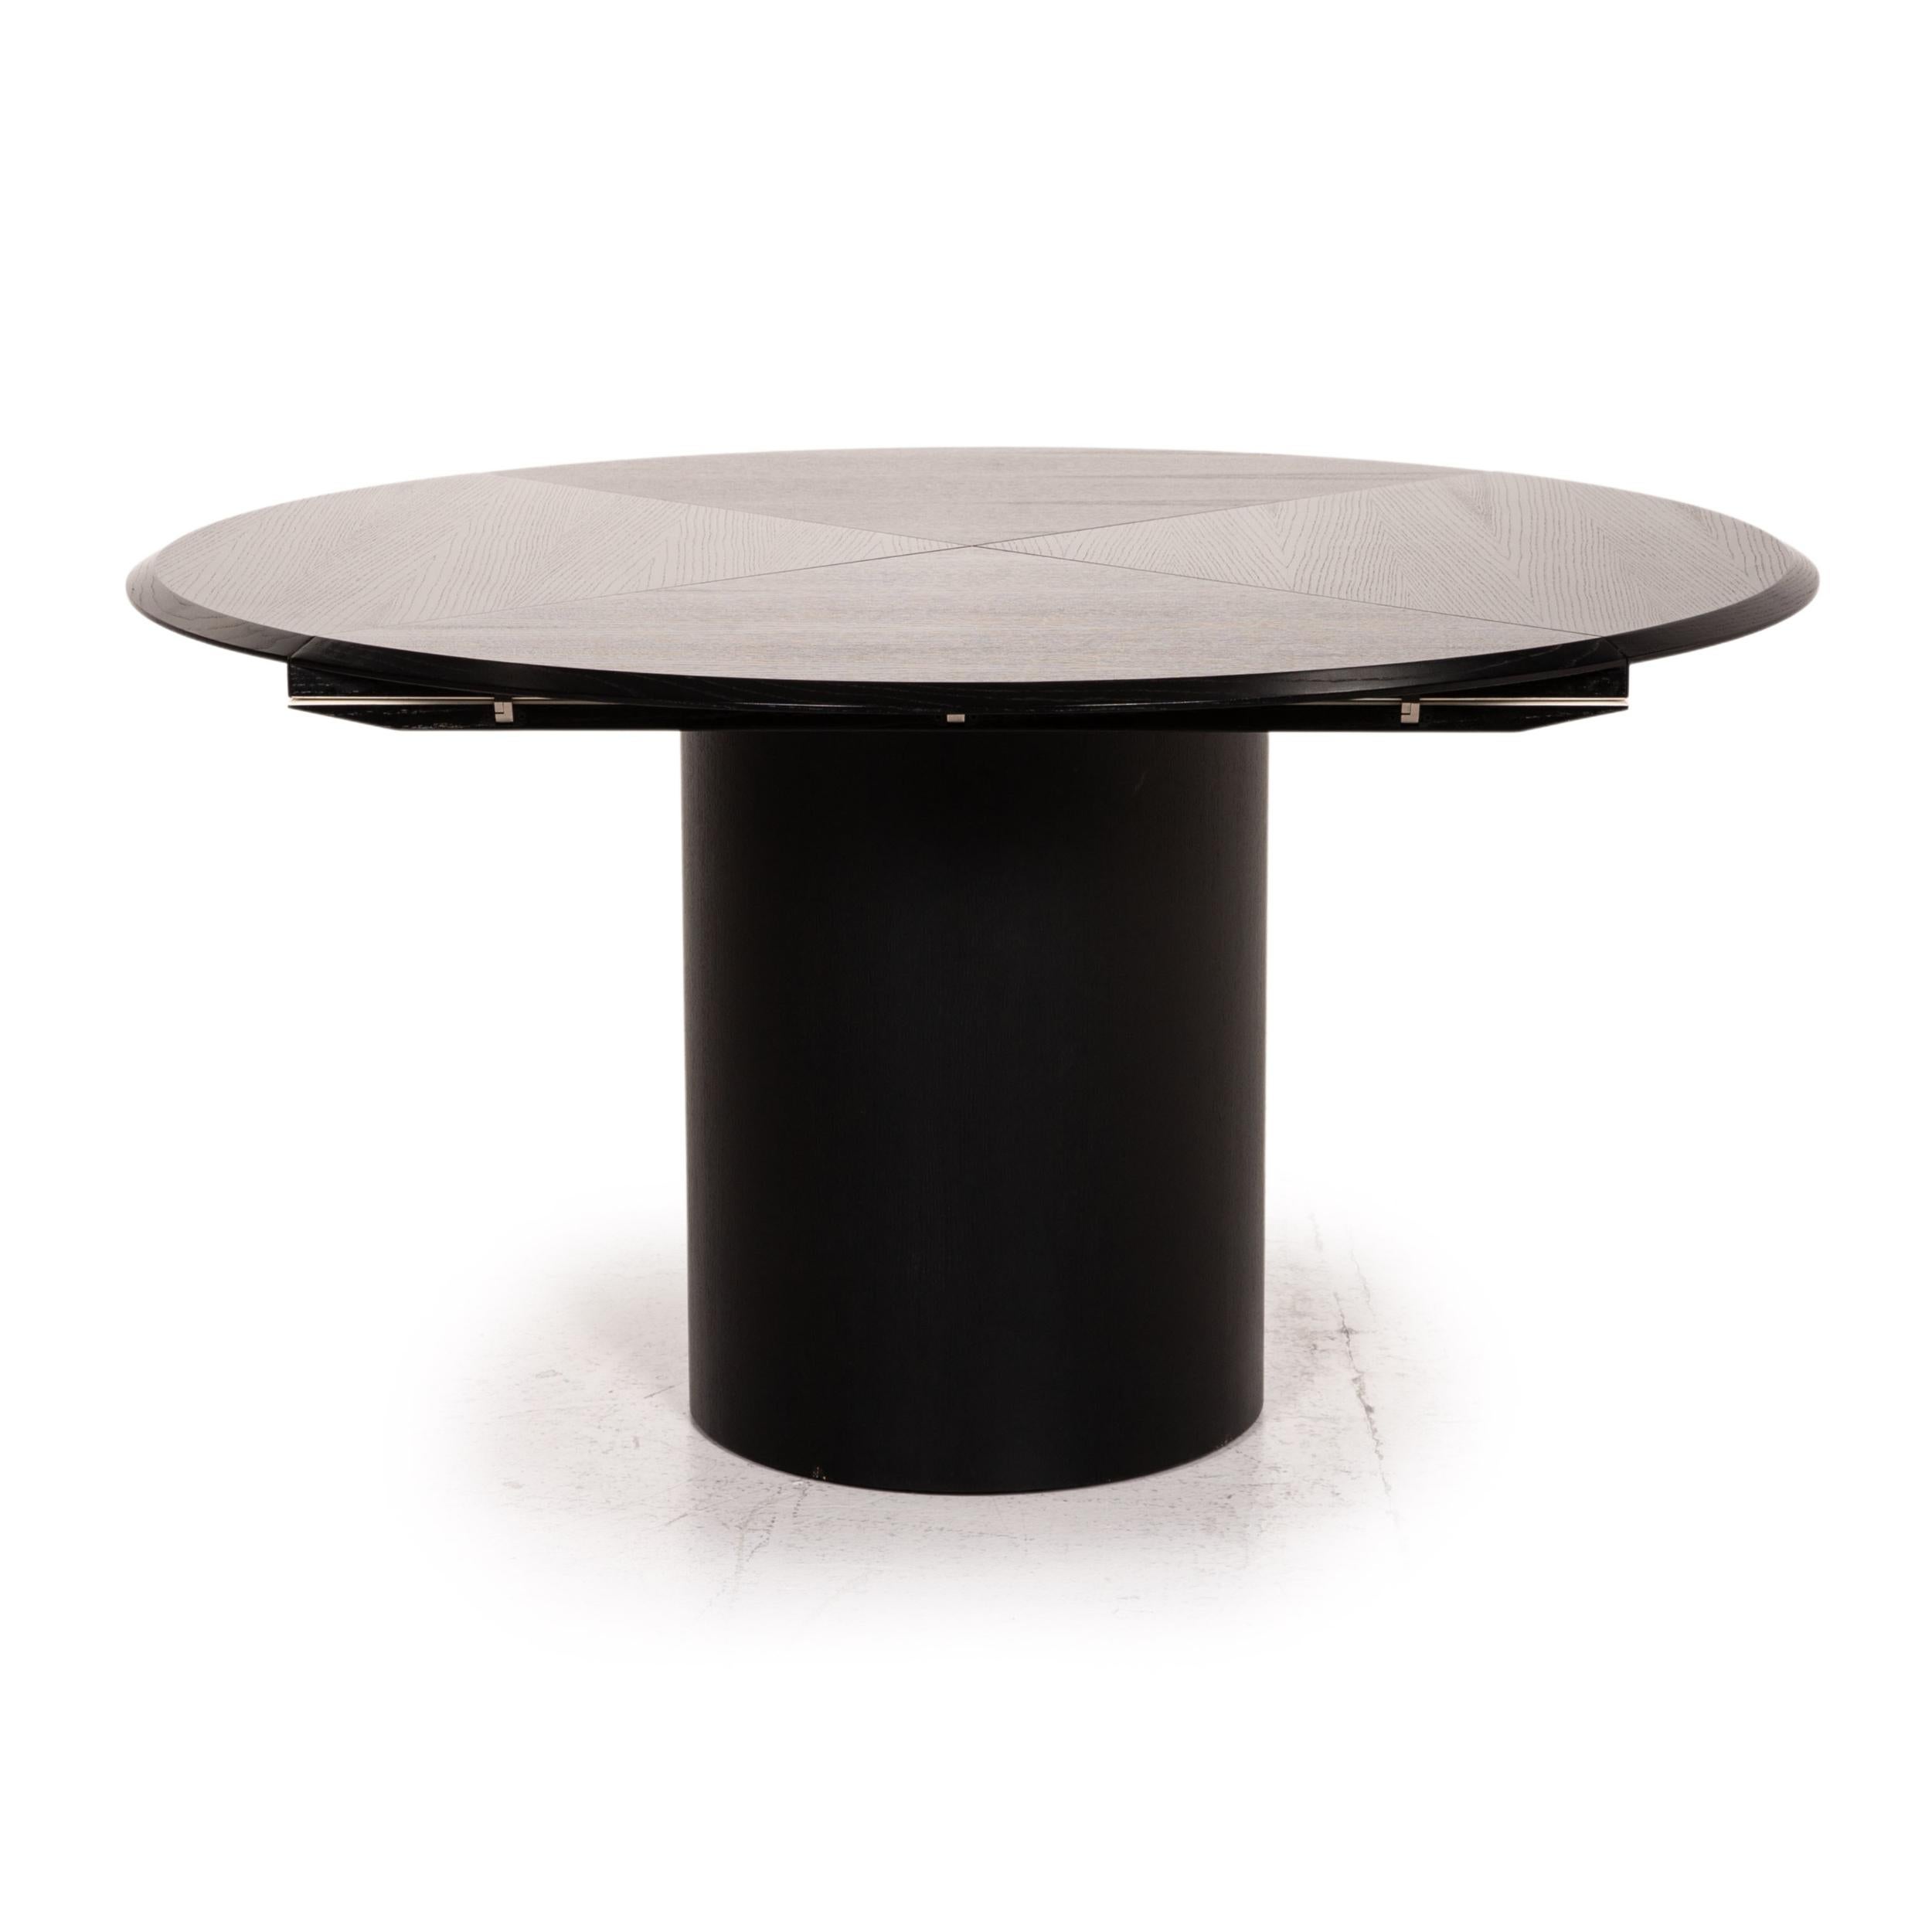 Rosenthal Quadrondo Dining Table Round Black and White Foldable Function Square 2